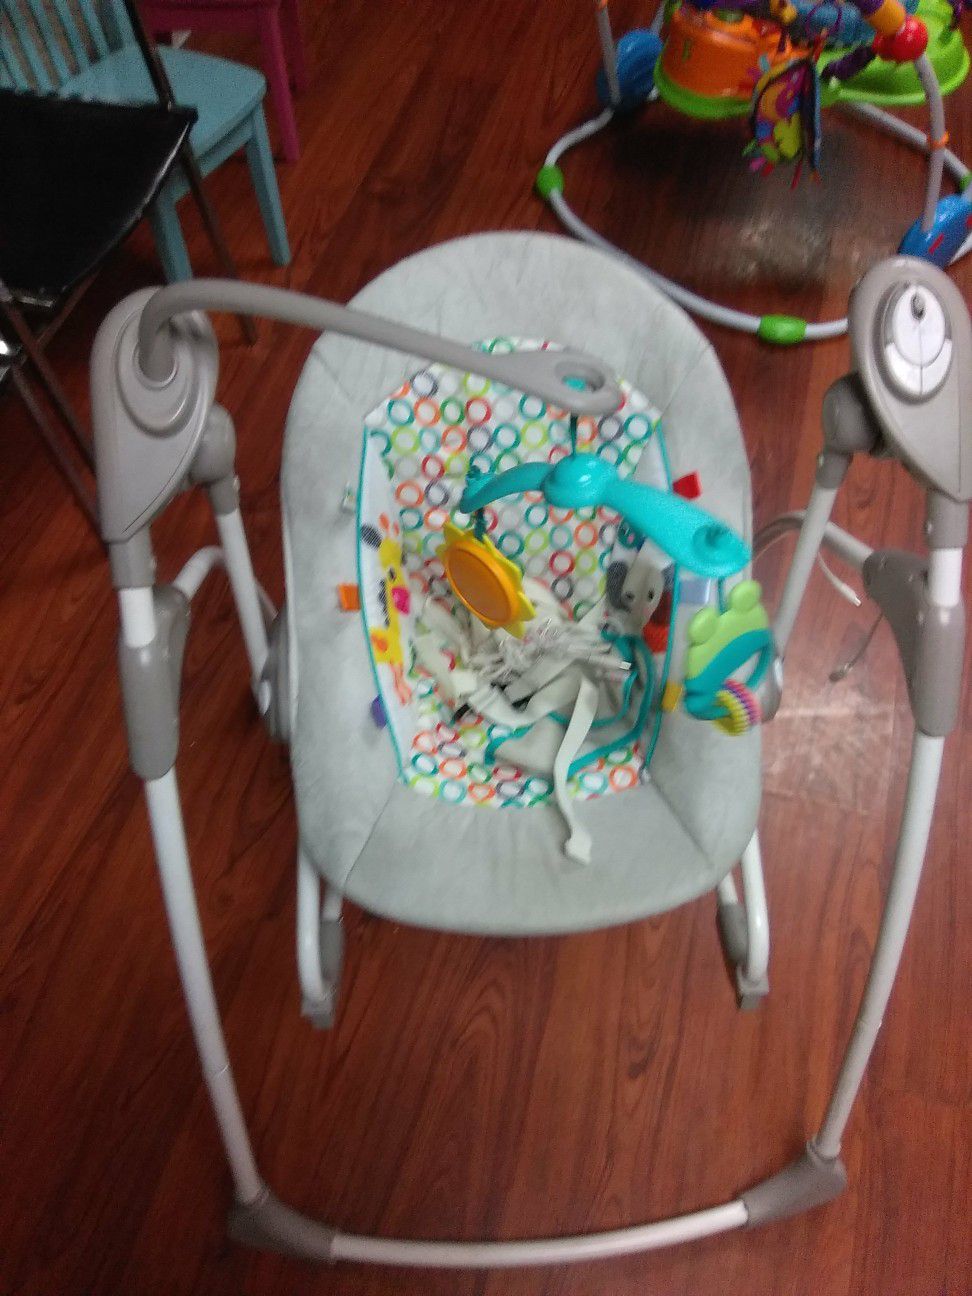 Baby swing and bouncer in one